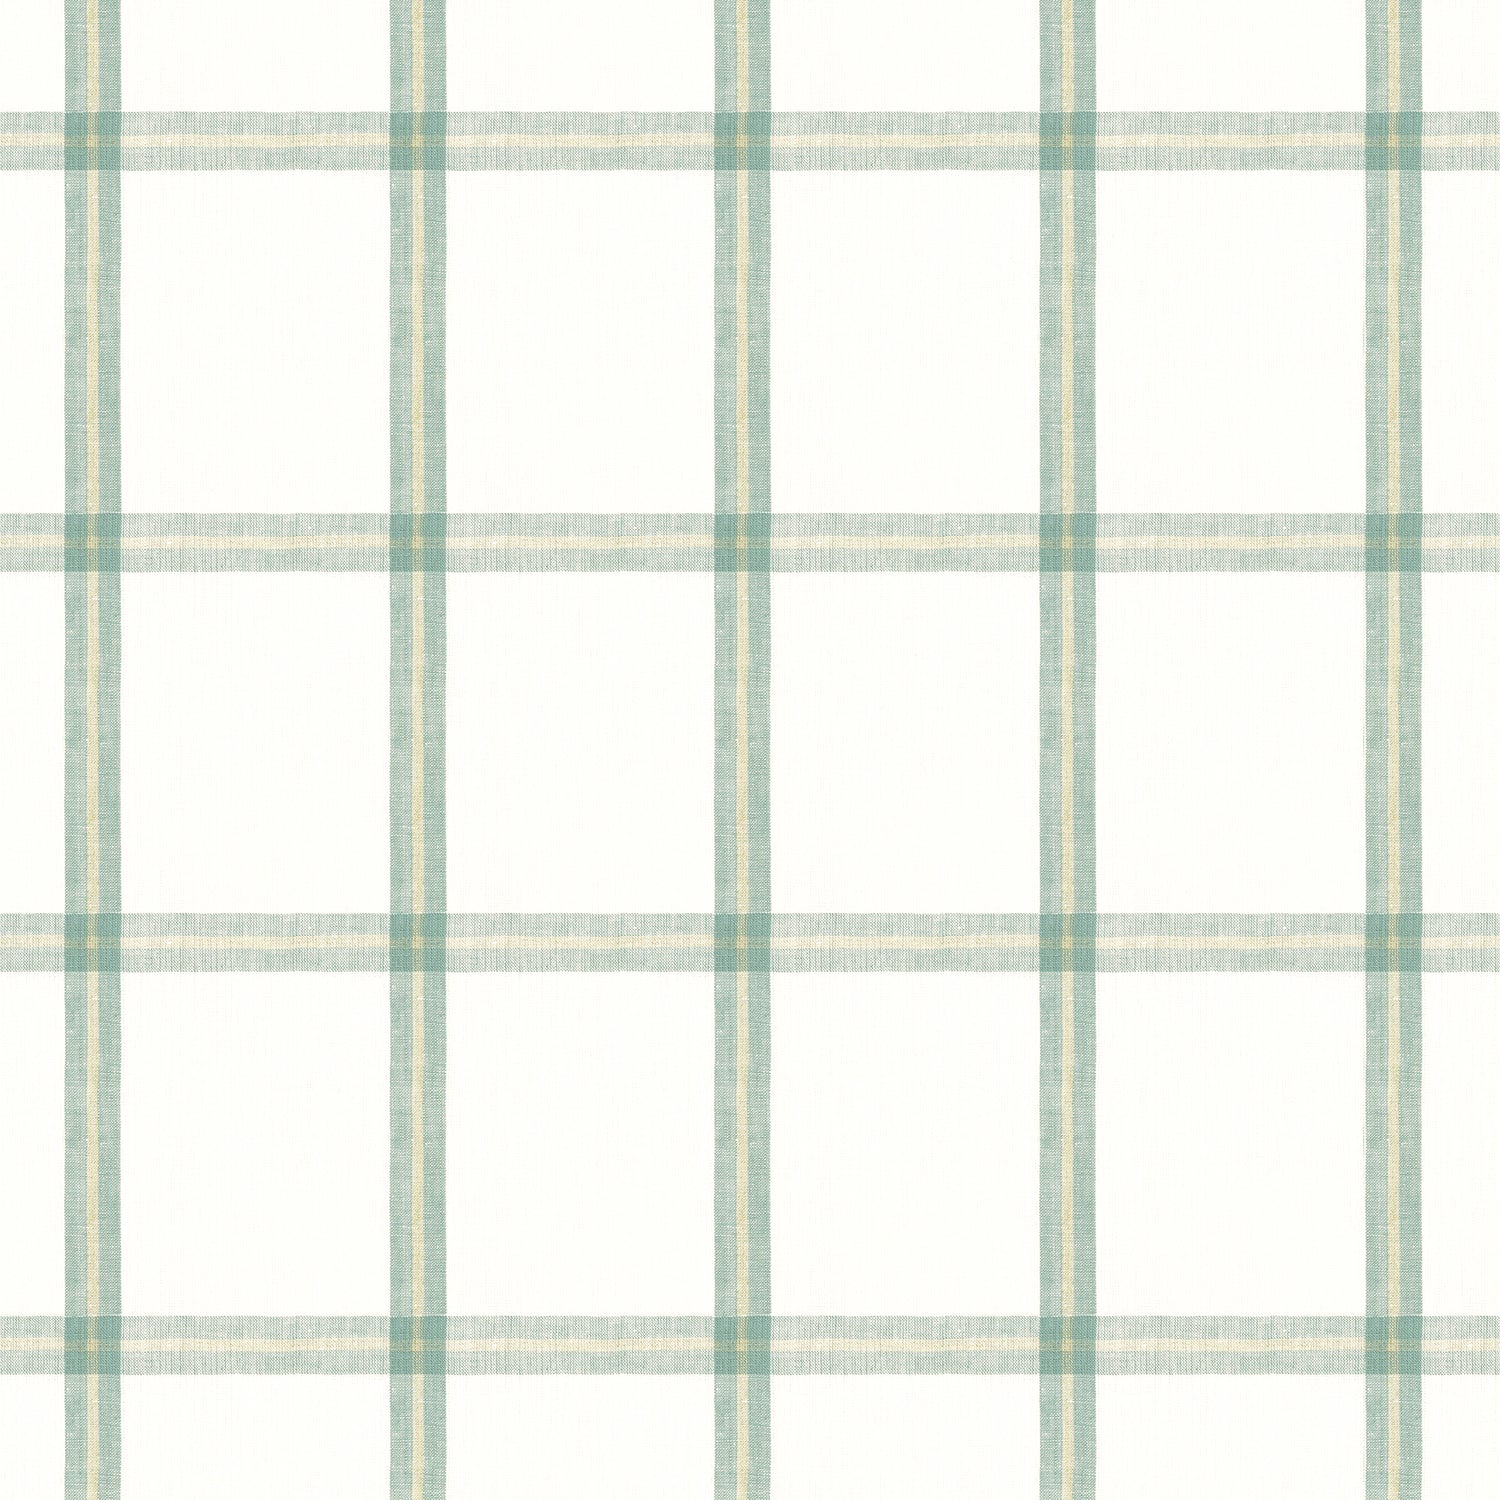 Huntington Plaid fabric in seaglass color - pattern number W781335 - by Thibaut in the Montecito collection